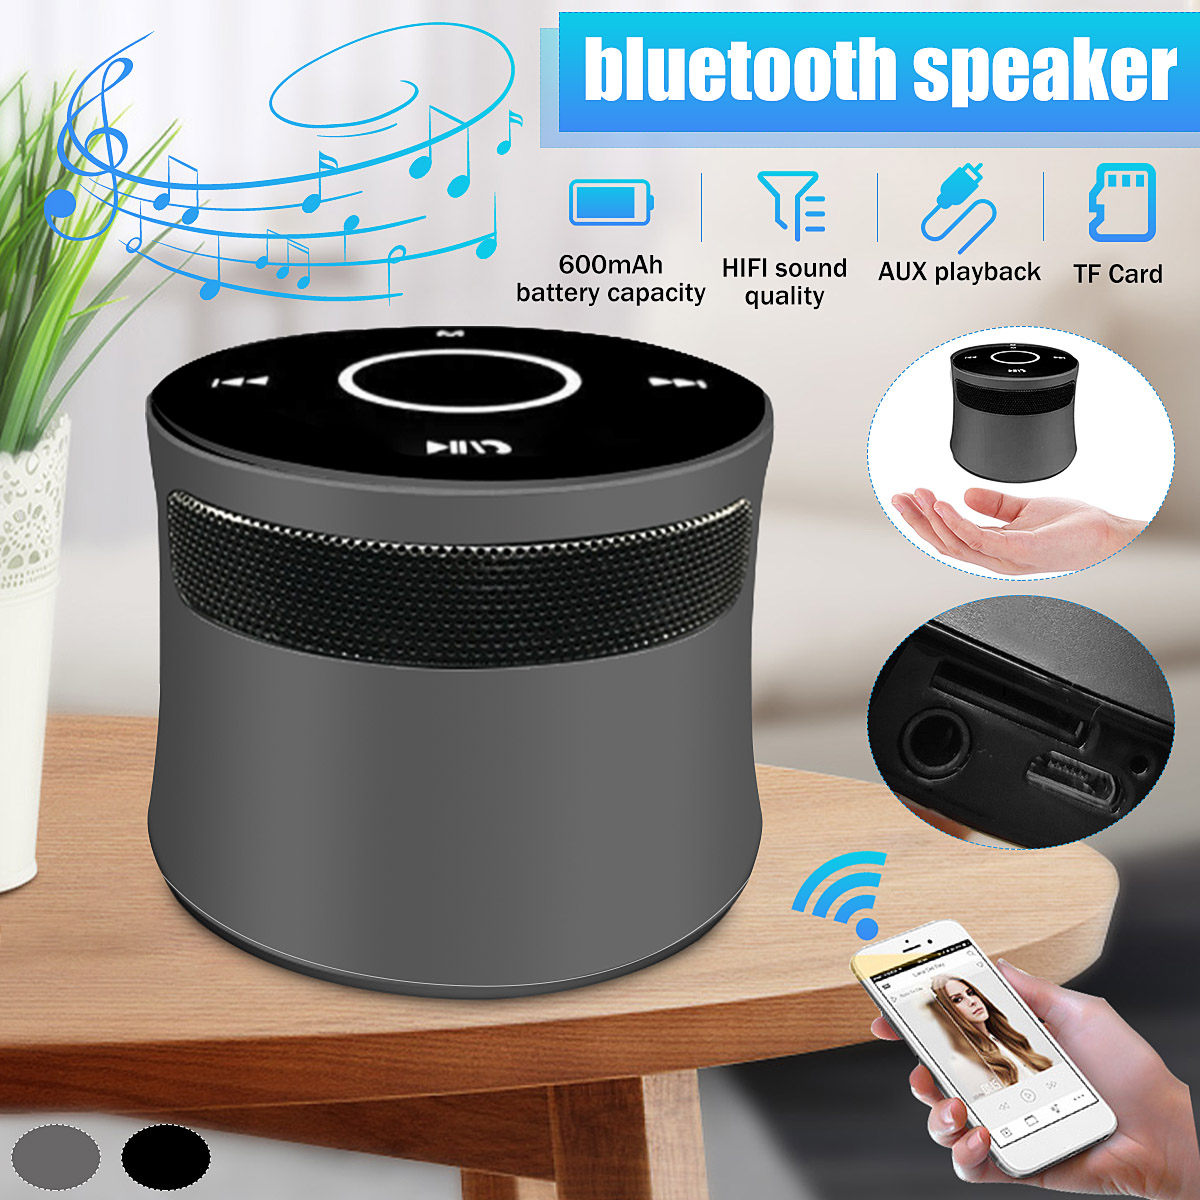 Bakeey-600mAh-TF-Card-Wireless-bluetooth-Speaker-AUX-Playback-HIFI-Sound-Player-Support-A2DP-AVRCP-H-1642267-1